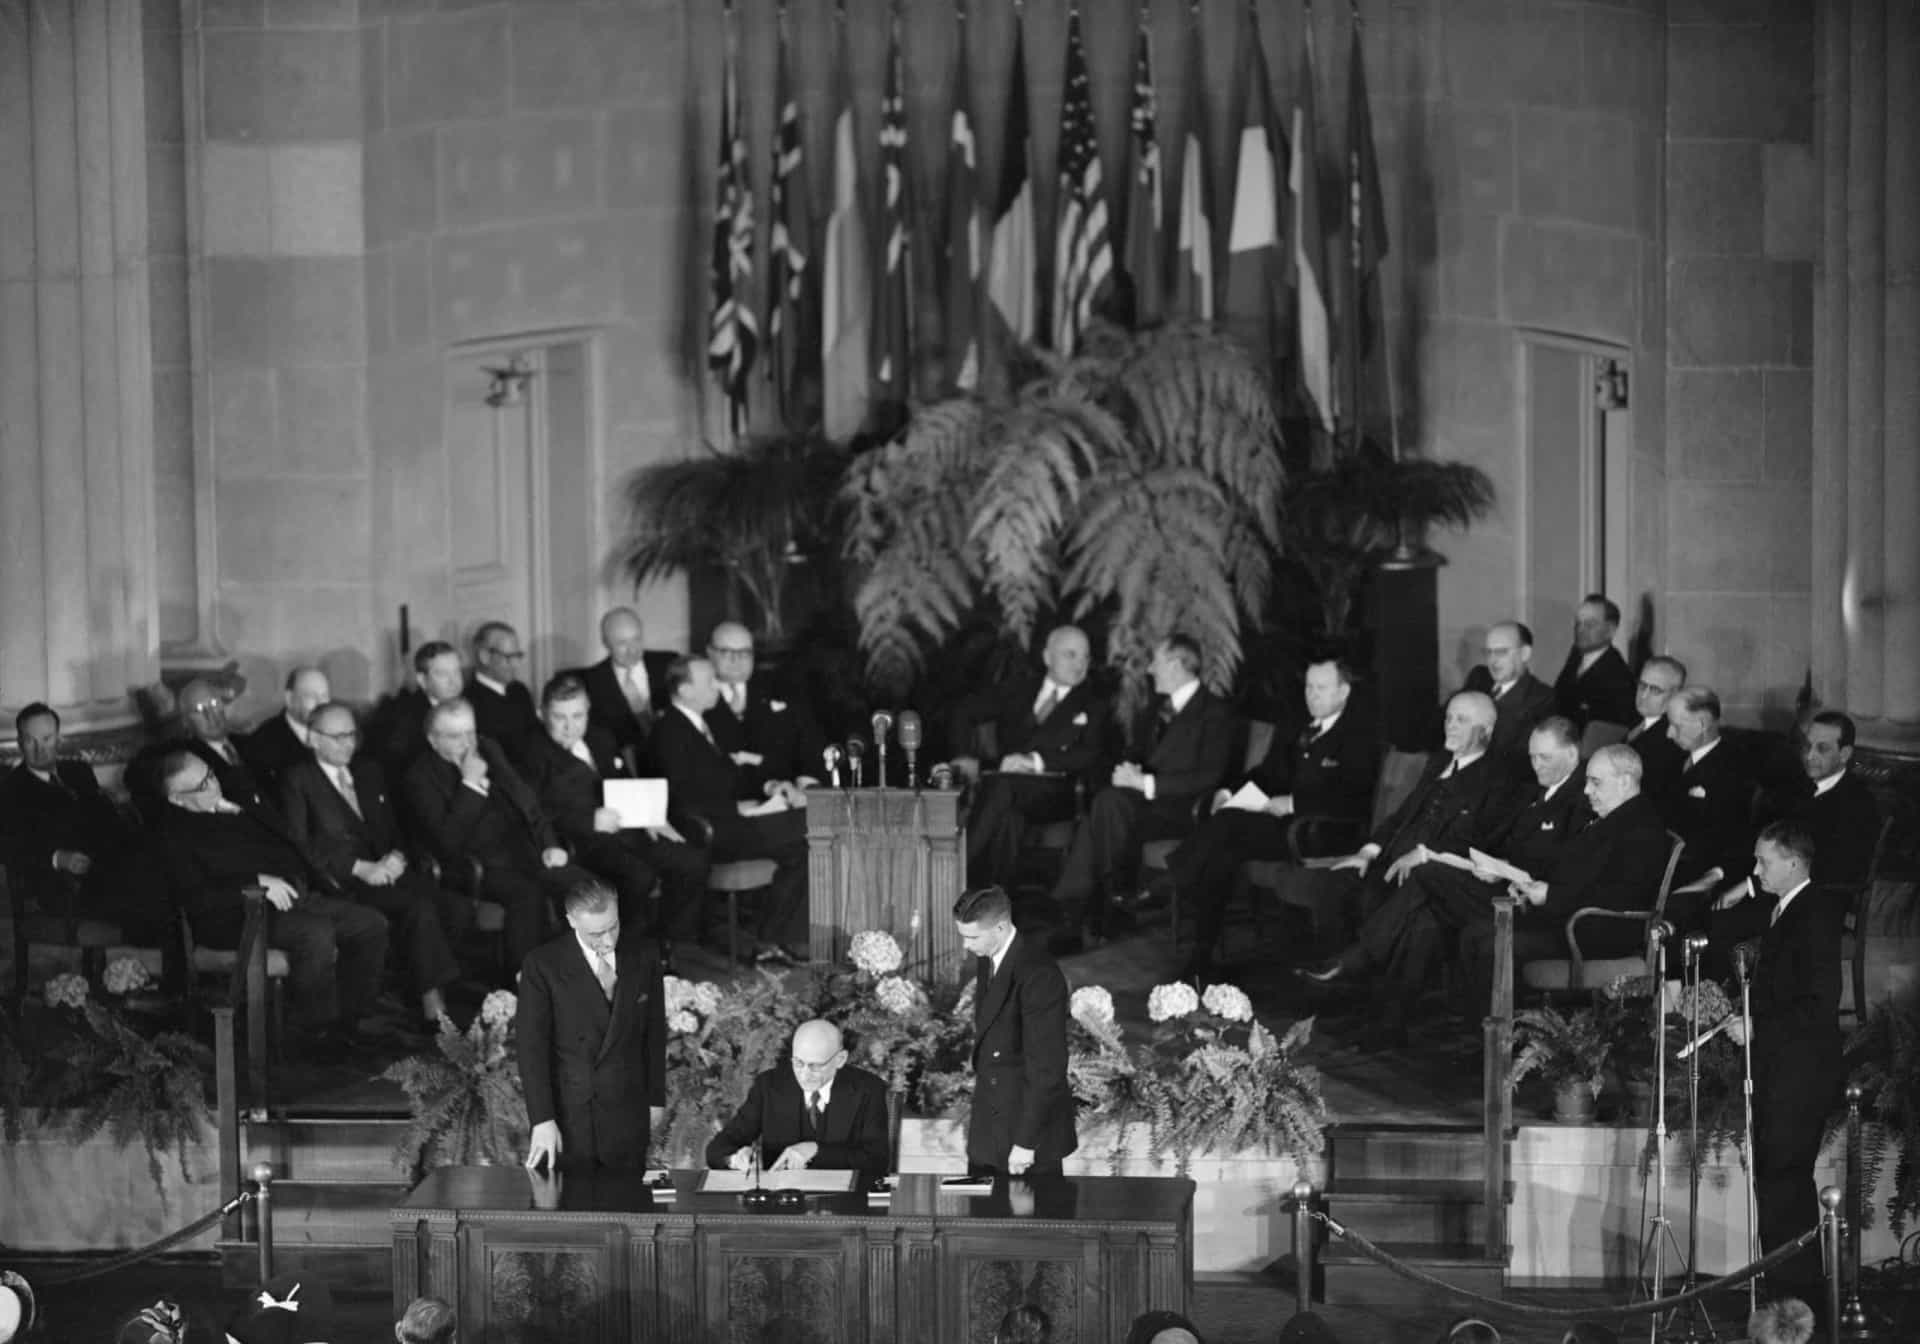 <p>The North Atlantic Treaty Organization (NATO) was formed on April 4, 1949 in Washington, D.C. It was created as a counterweight to Soviet armies stationed in central and eastern Europe after the Second World War.</p>